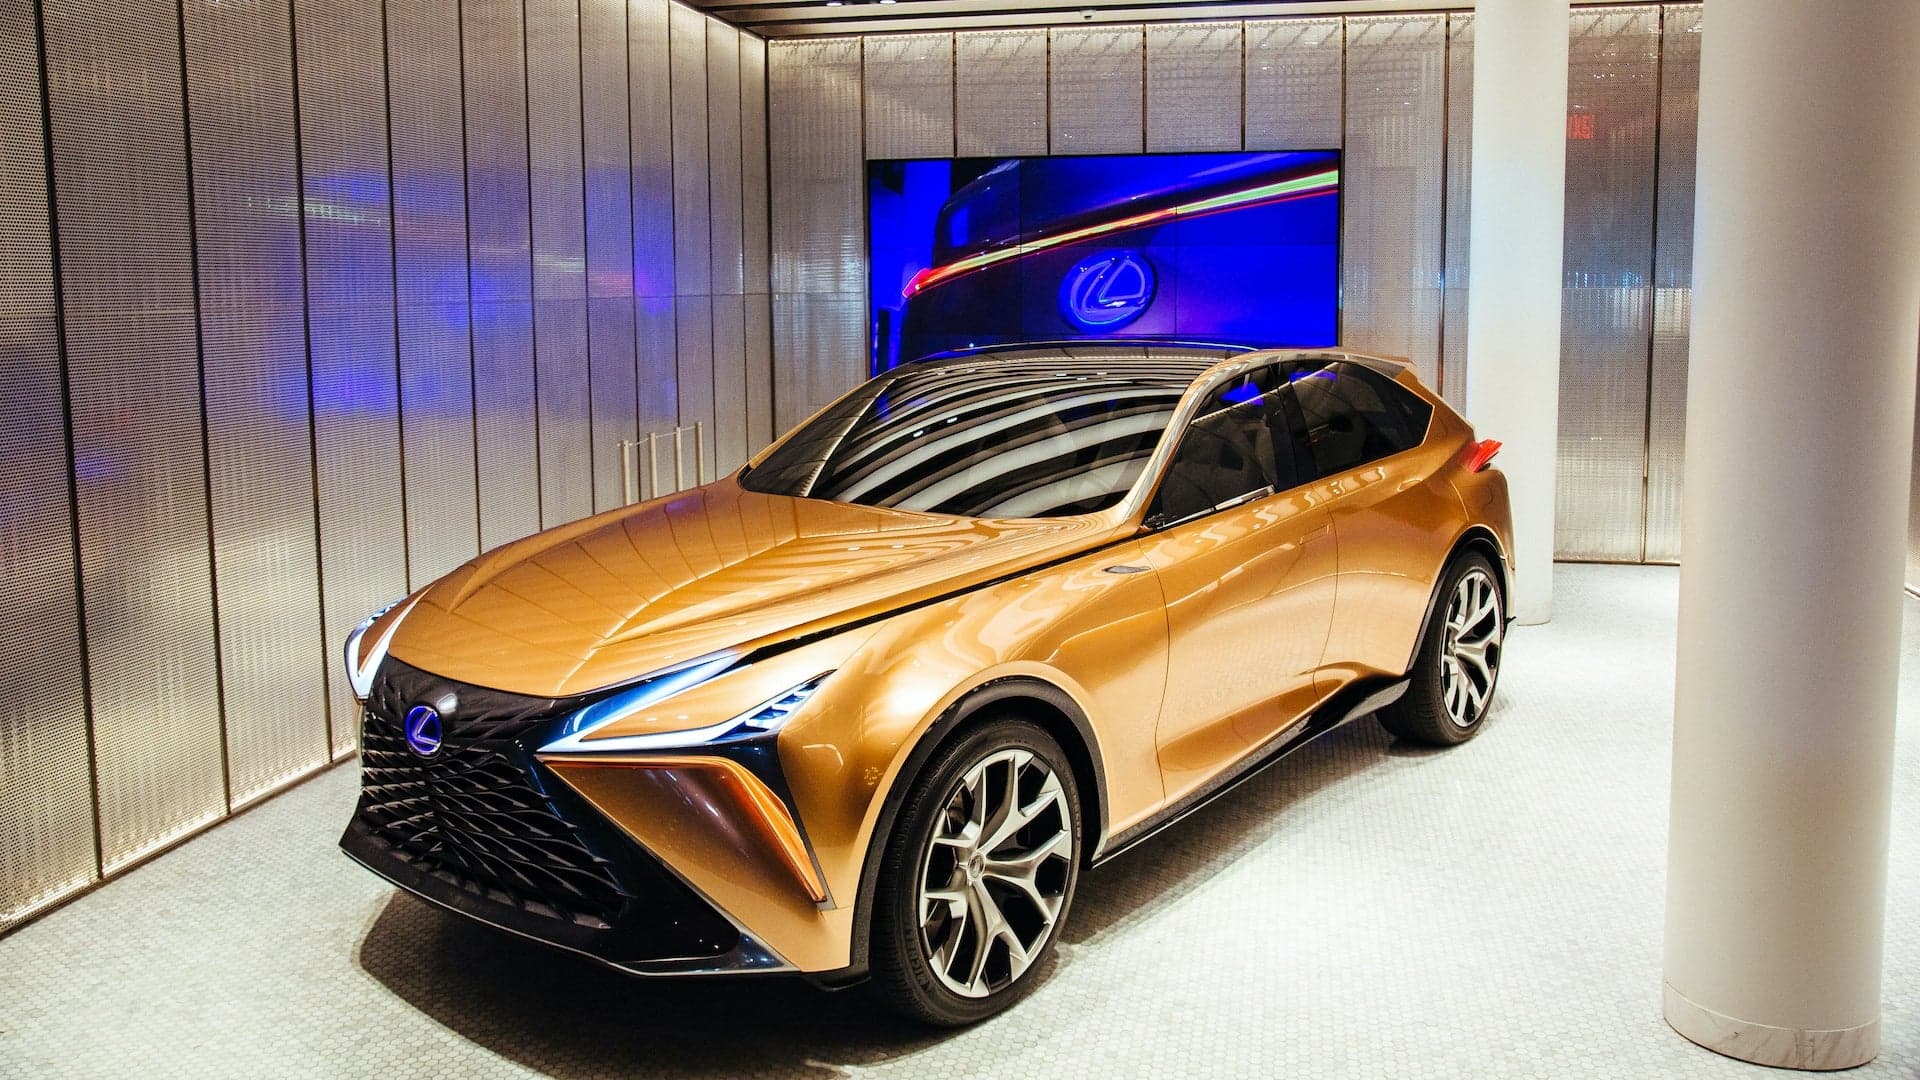 Lexus Is Building an LS-Based Flagship SUV that Could Have Over 600 HP: Report